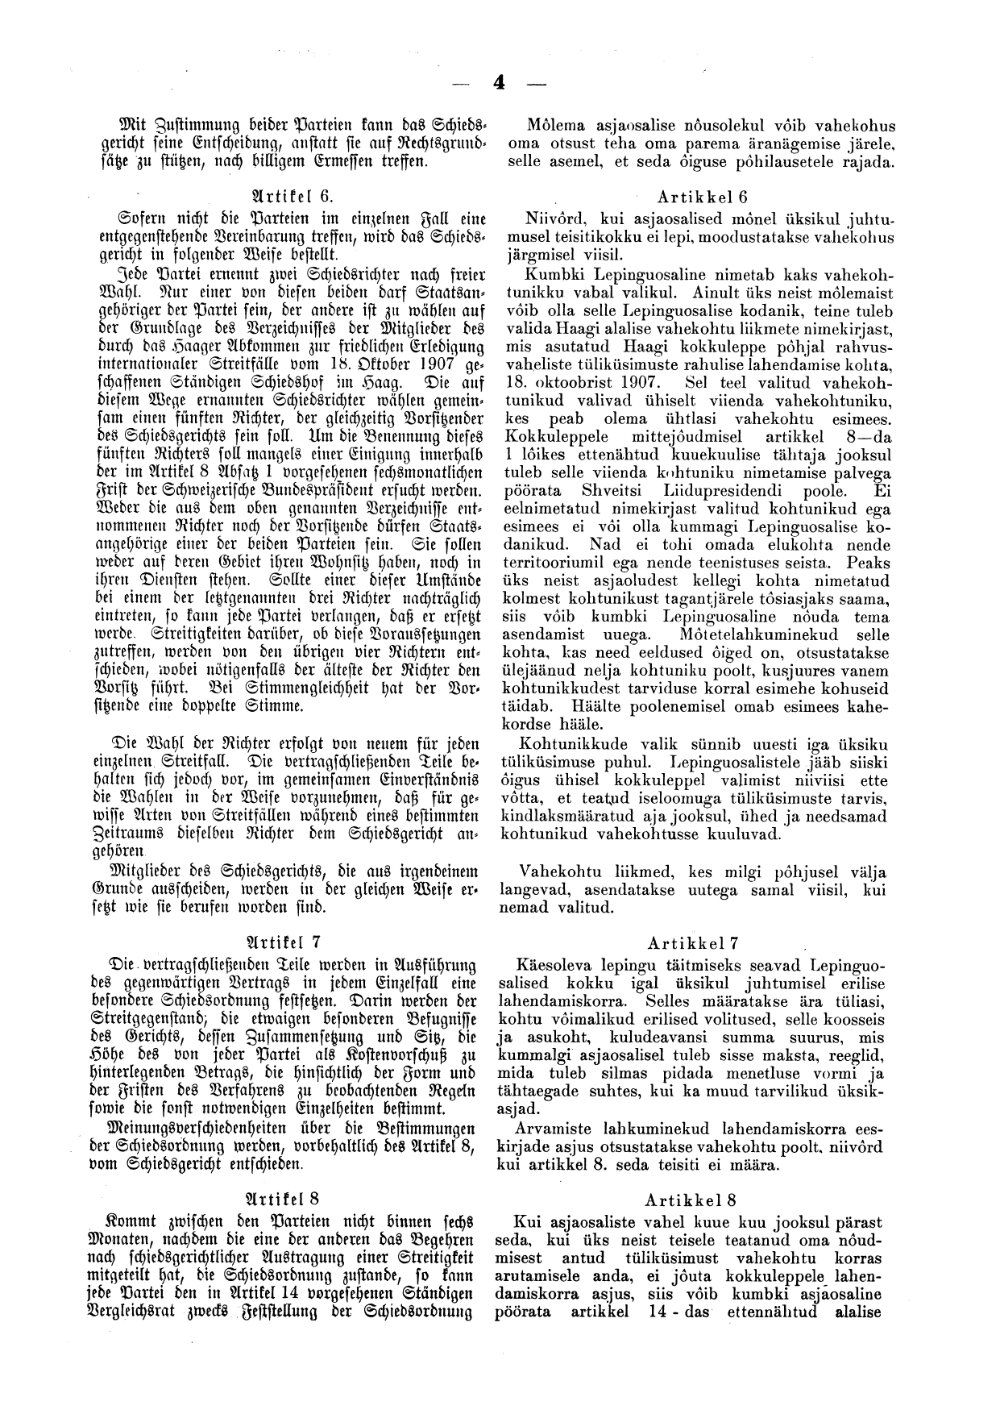 Scan of page 4